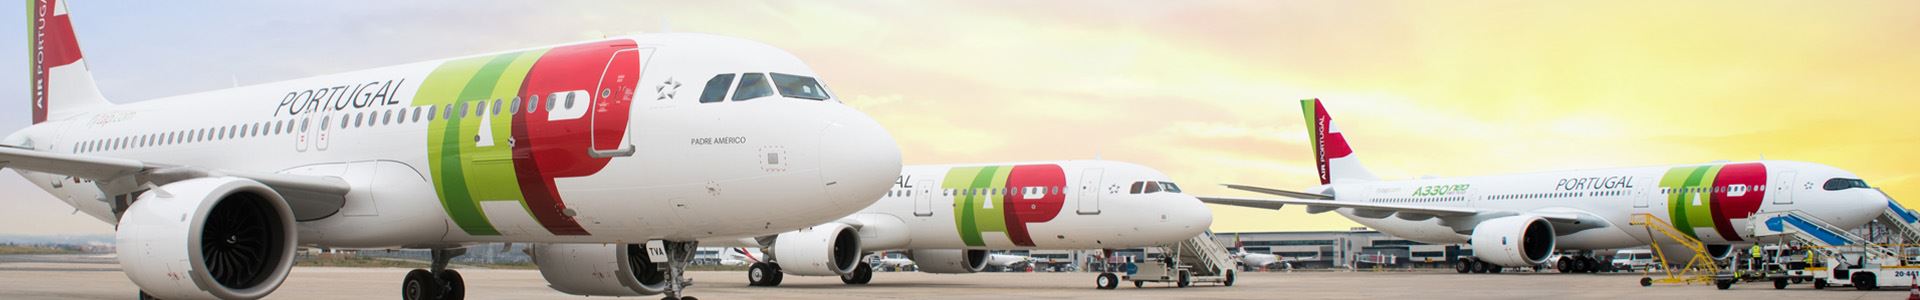 Photograph showing three planes arranged side by side, decorated with the colors and logo of TAP Air Portugal.